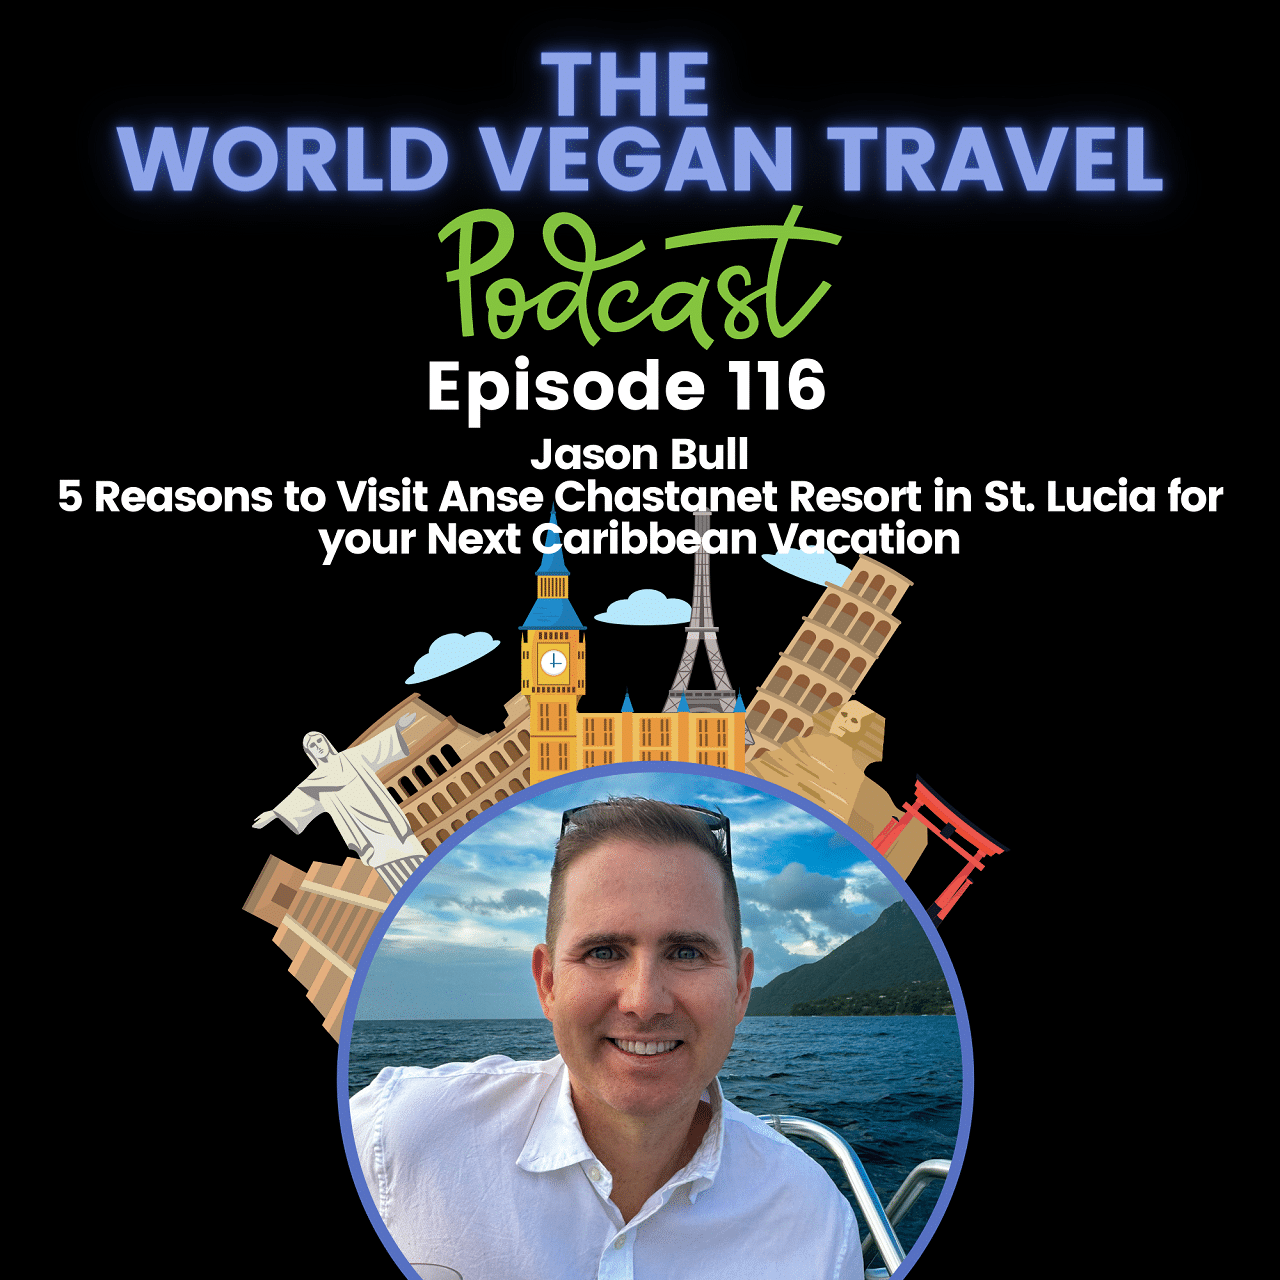 A smiling gentleman looking at the camera. TEXT : The World Vegan Travel Episode 116 Jason Bull. 5 Reasons to Visit Anse Chastanet Resort in St. Lucia for your Next Caribbean Vacation